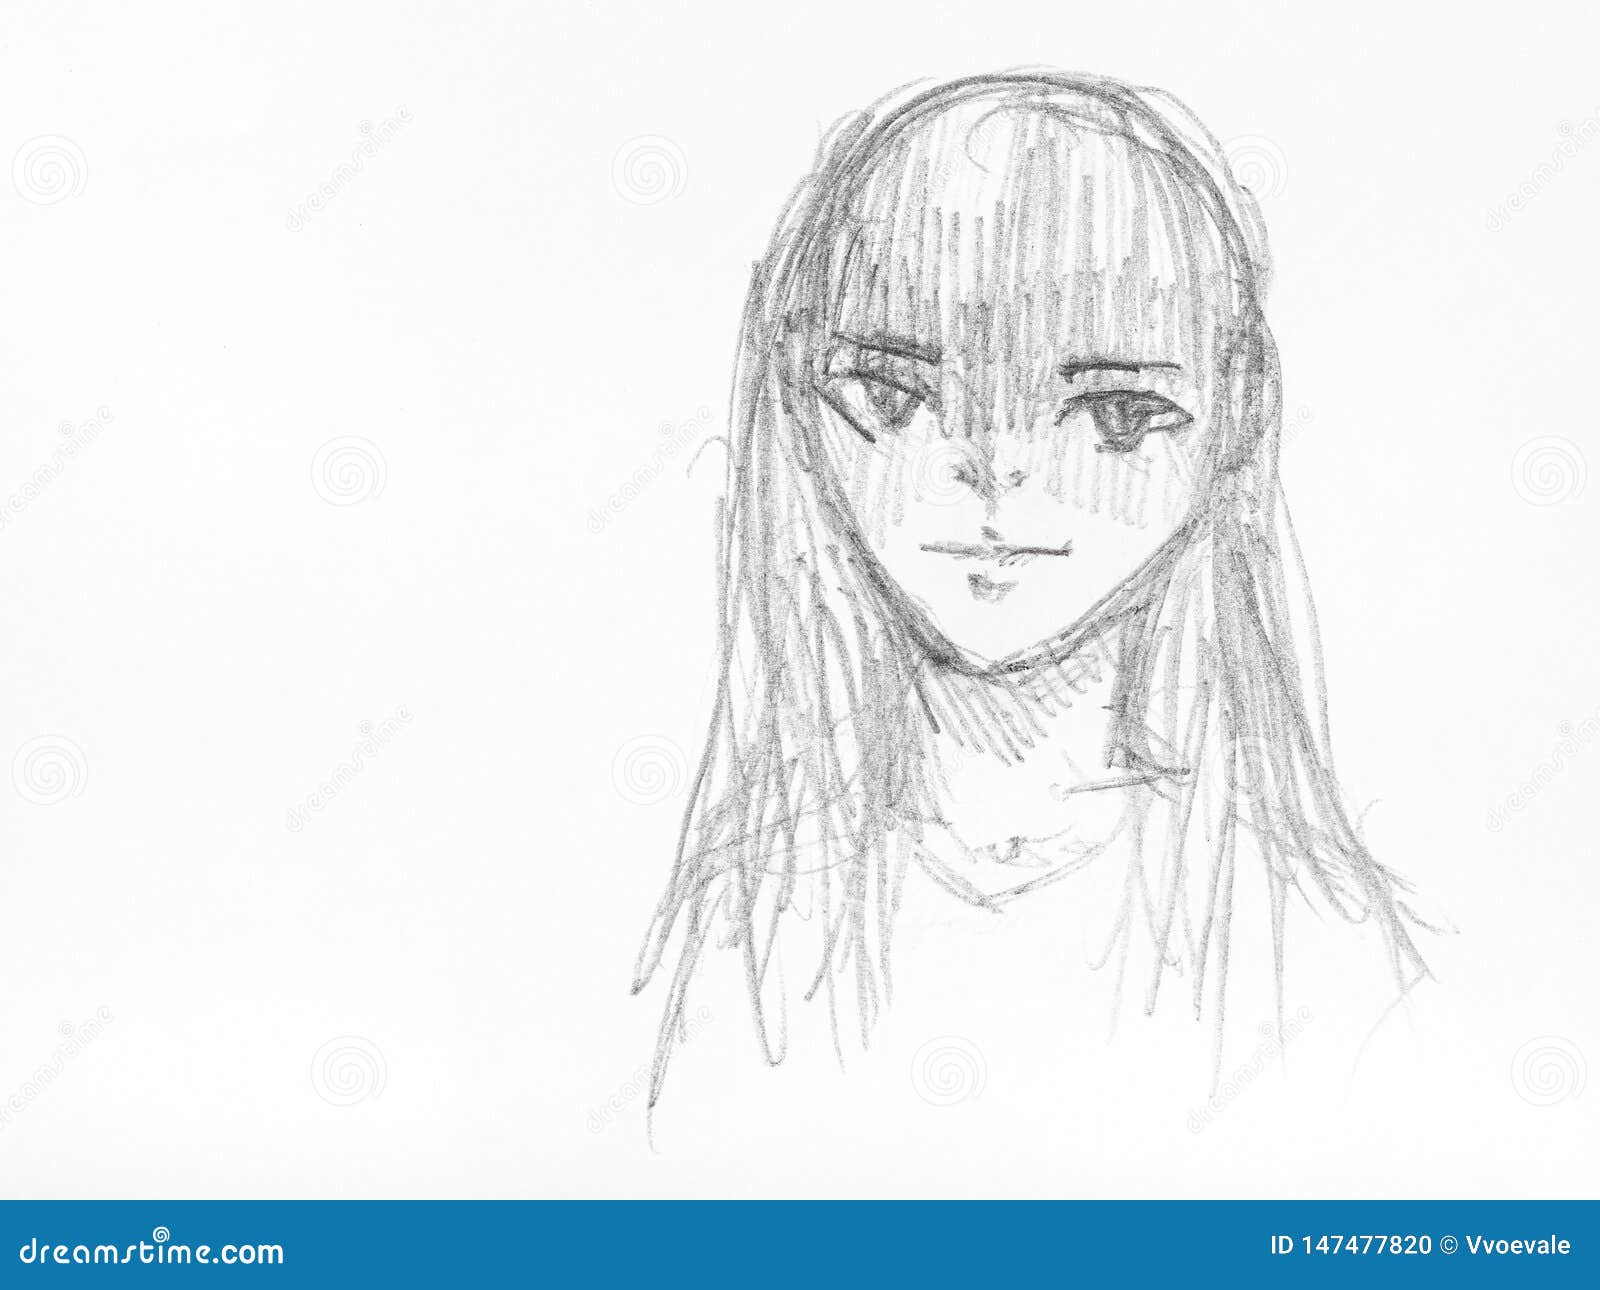 Sketch Of Girl With Long Straight Hair By Pencil Stock